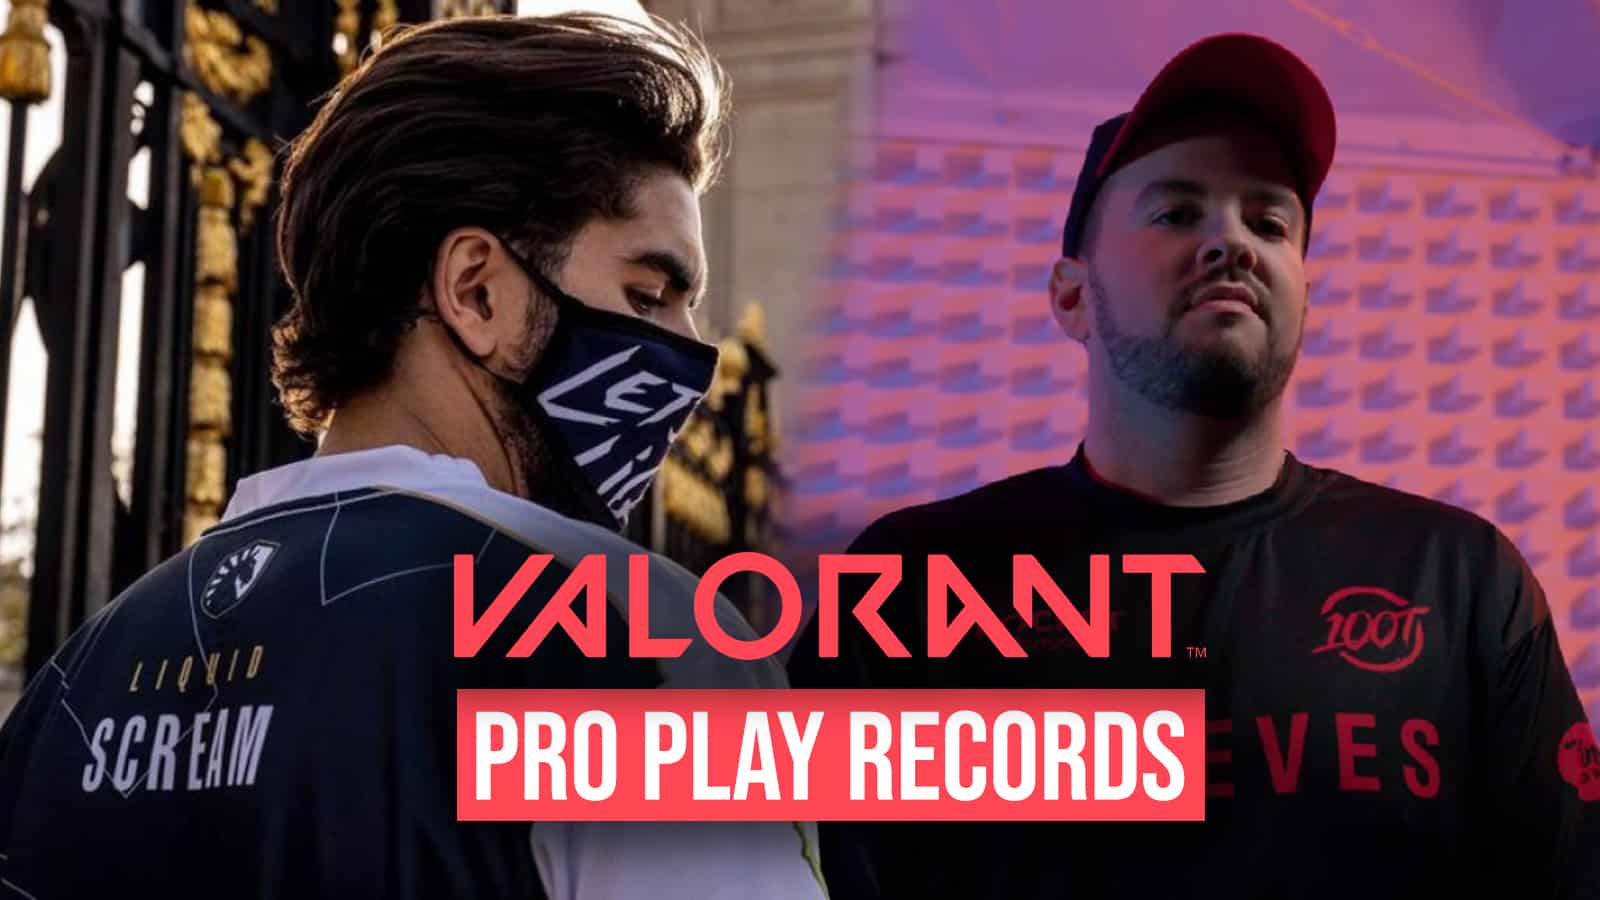 Valorant pro play records featuring scream and hiko